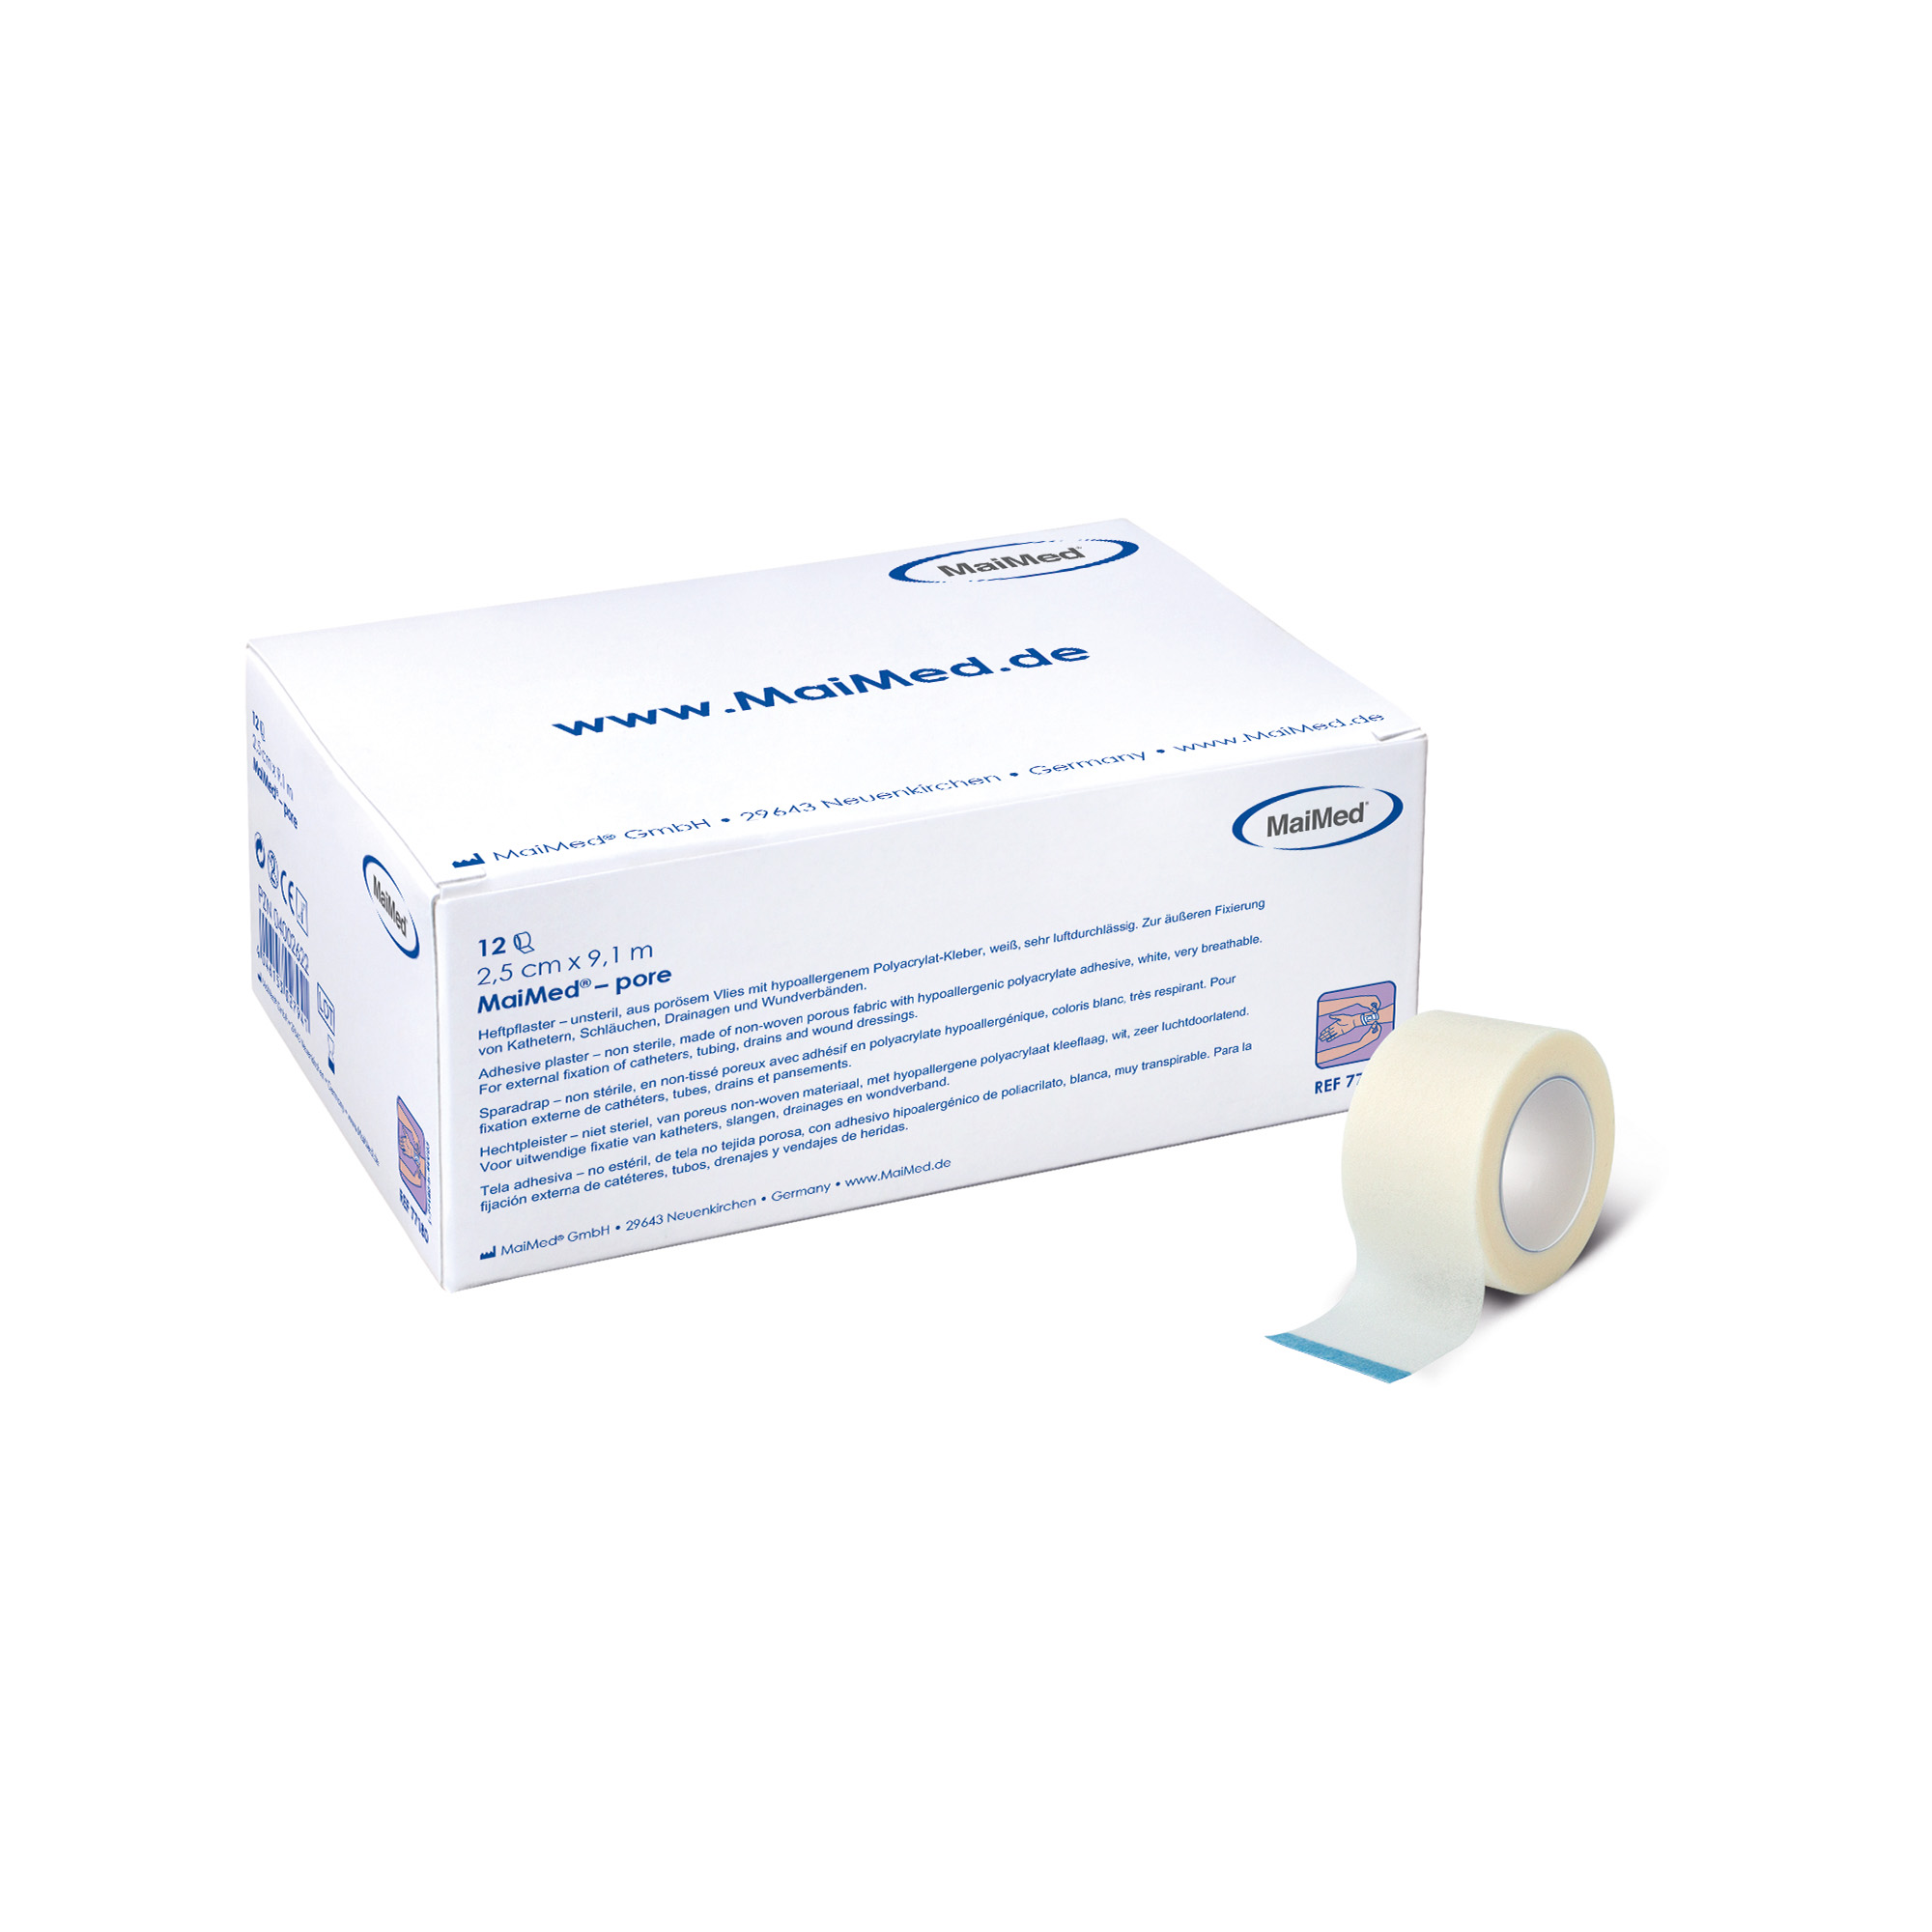 MaiMed Pore, Adhesive Plaster from Non-Woven Material, 1.25cmx9.1m, 24 pcs.